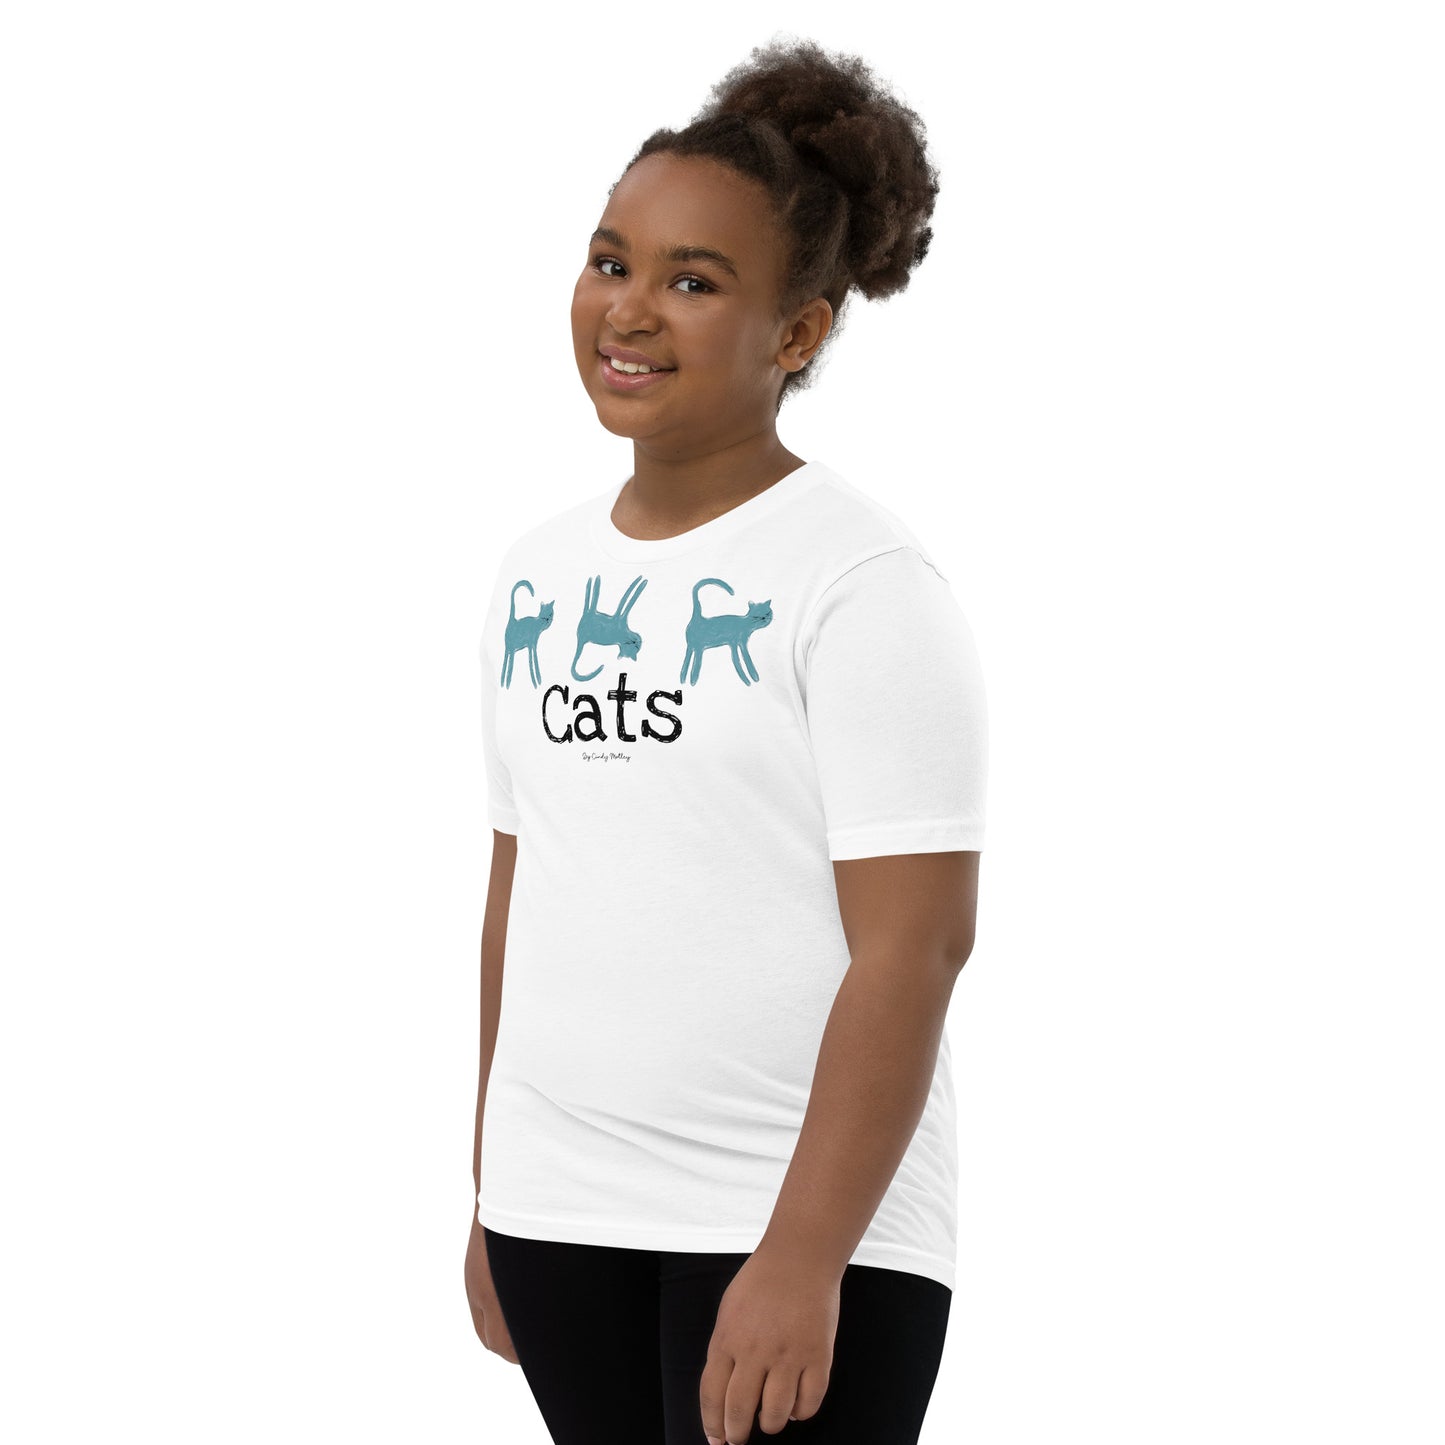 Cats By Cindy Motley Youth Short Sleeve T-Shirt